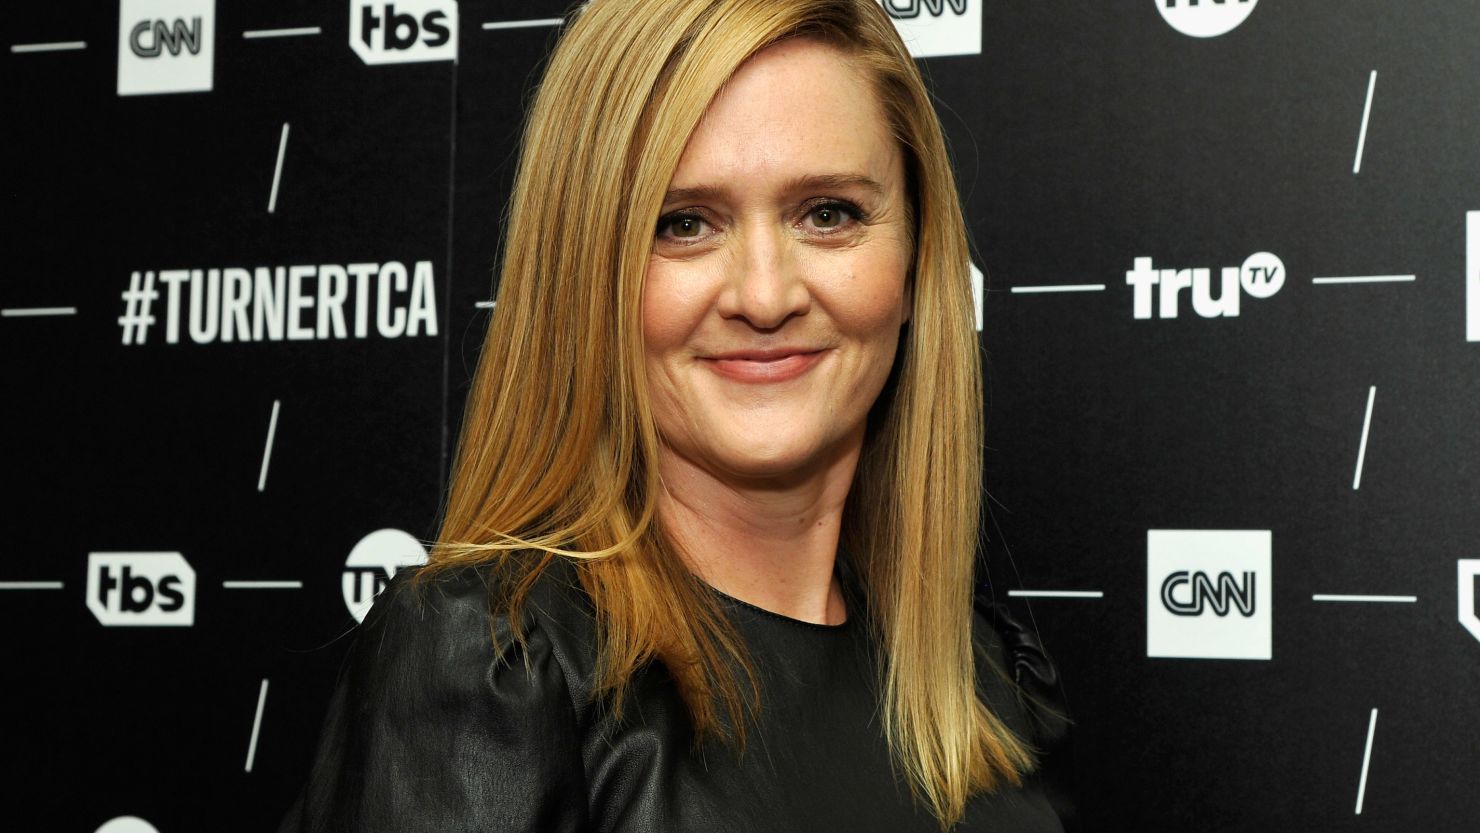 Host/Executive Producer Samantha Bee of 'Full Frontal With Samantha Bee' poses in the green room during the TCA Turner Winter Press Tour 2017 Presentation at The Langham Resort on January 14, 2017 in Pasadena, California.